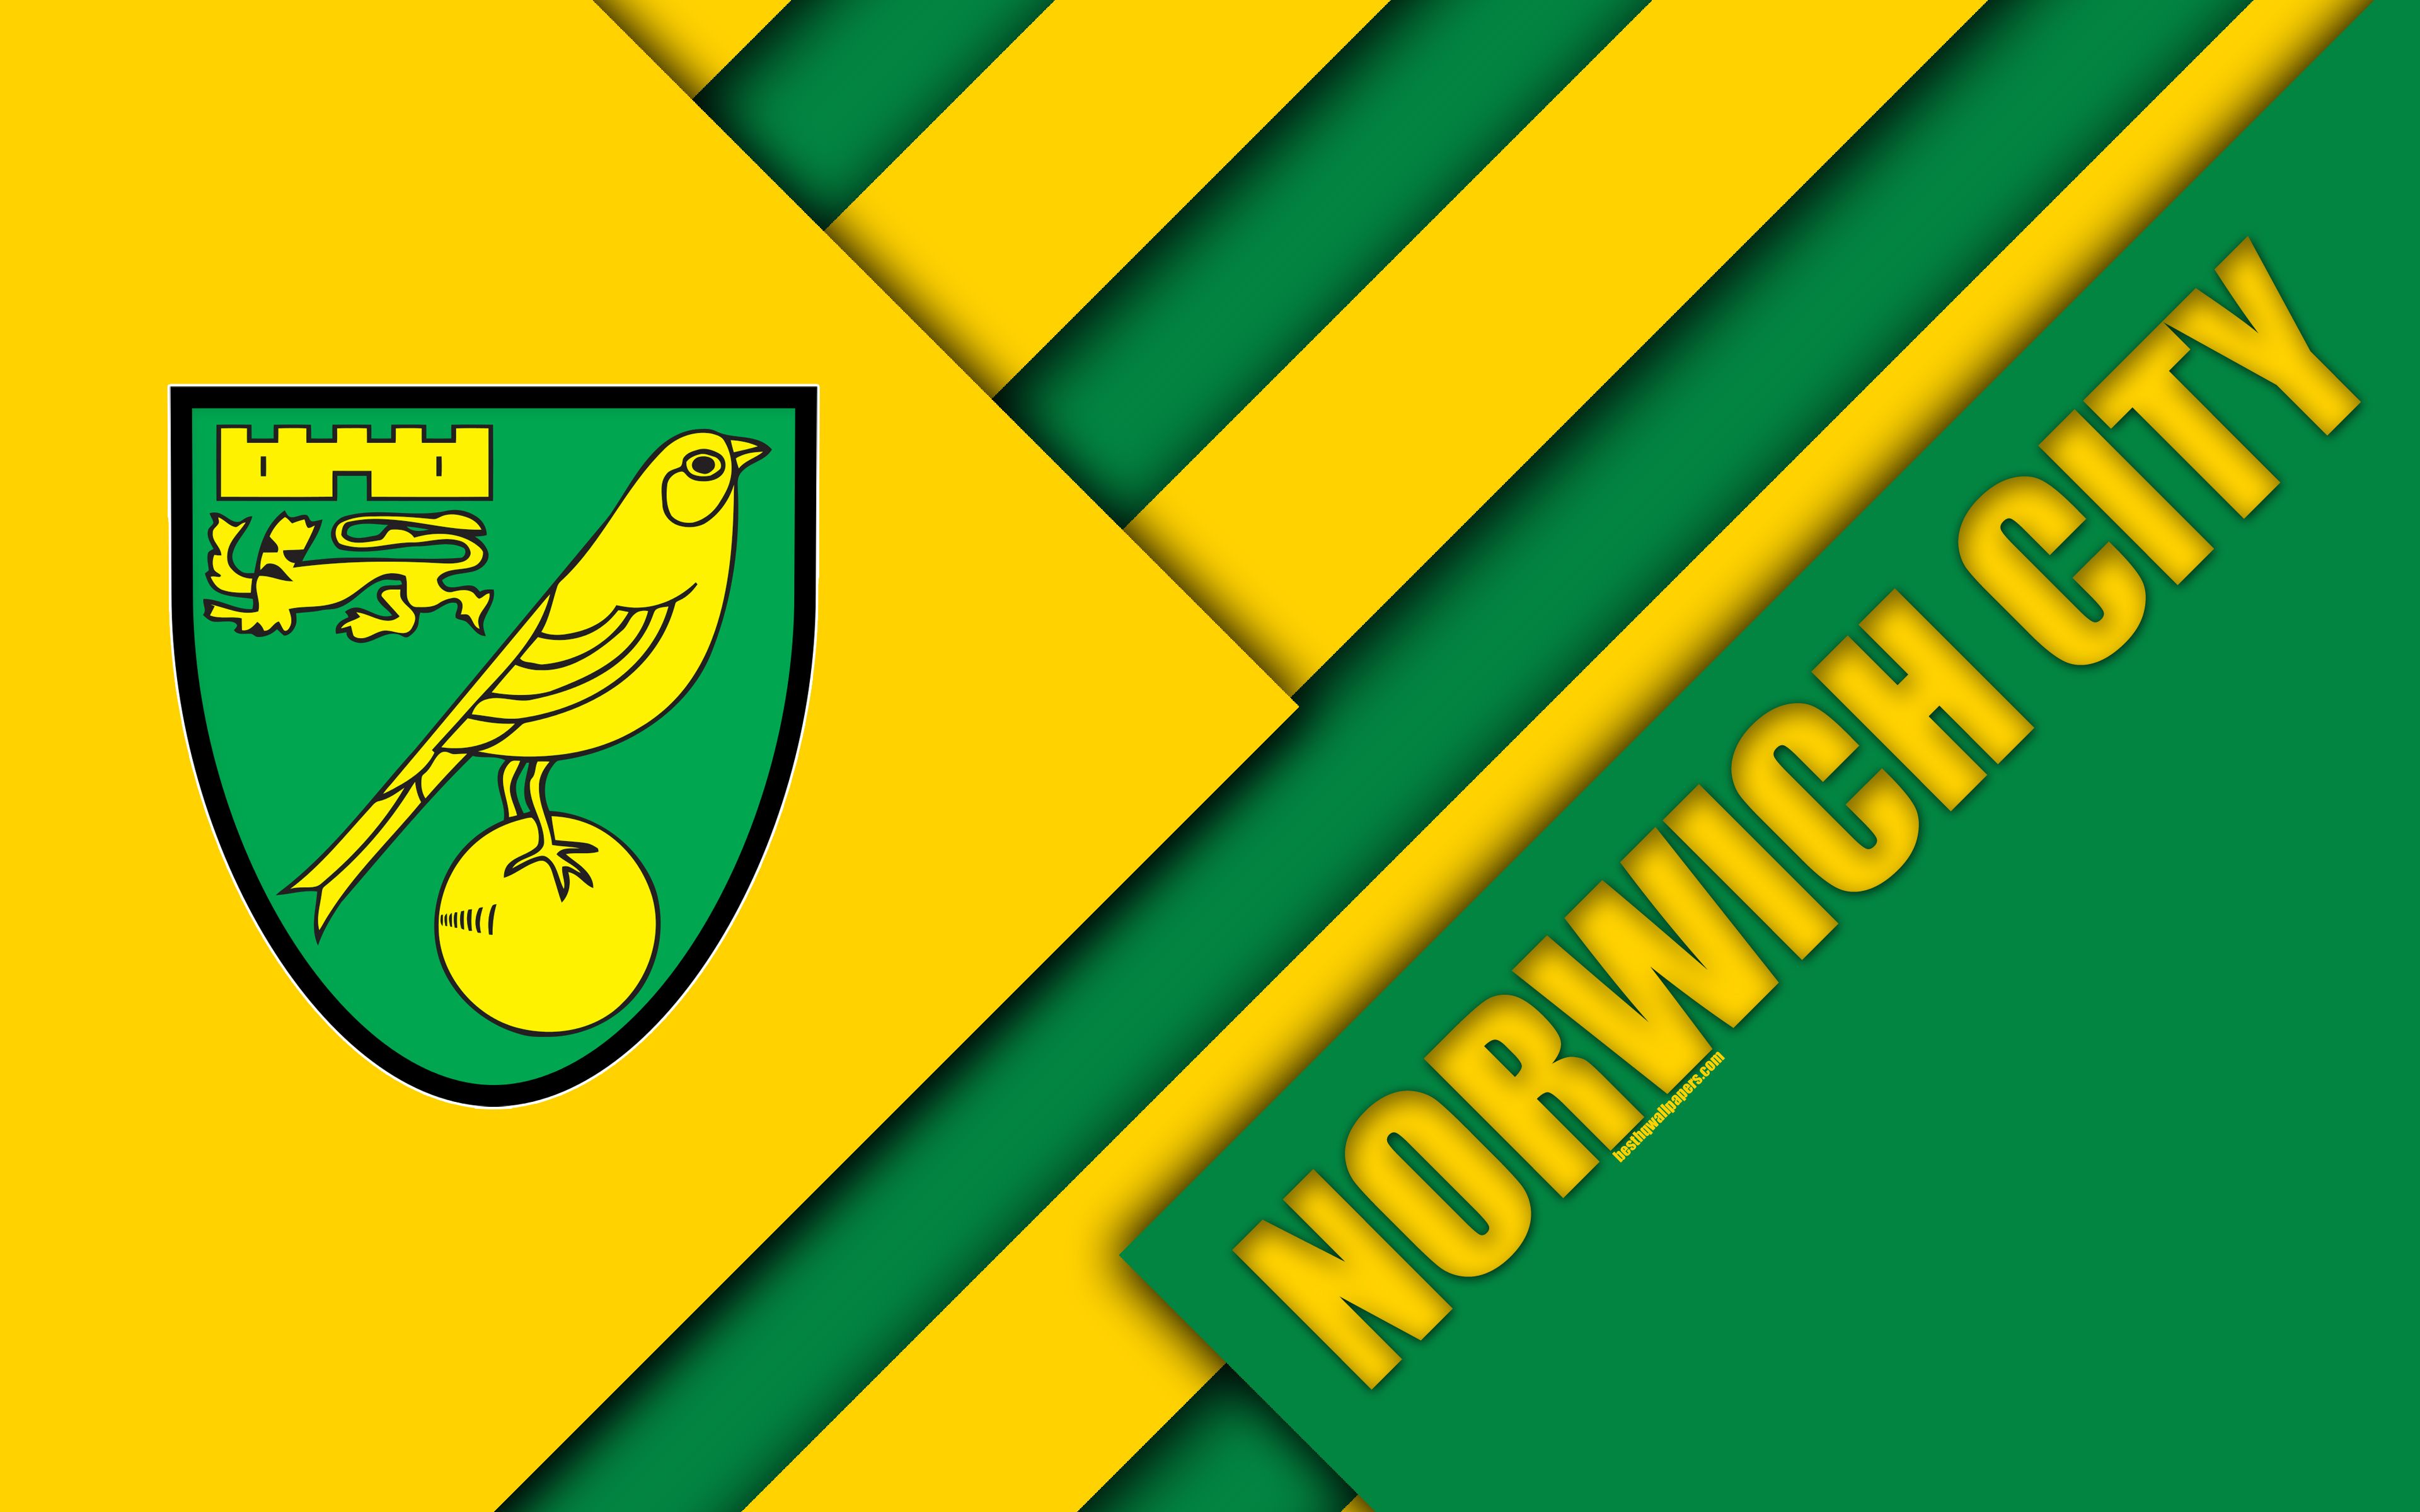 Download wallpaper Norwich City FC, logo, 4k, yellow green abstraction, material design, English football club, Norwich, England, UK, football, EFL Championship for desktop with resolution 3840x2400. High Quality HD picture wallpaper